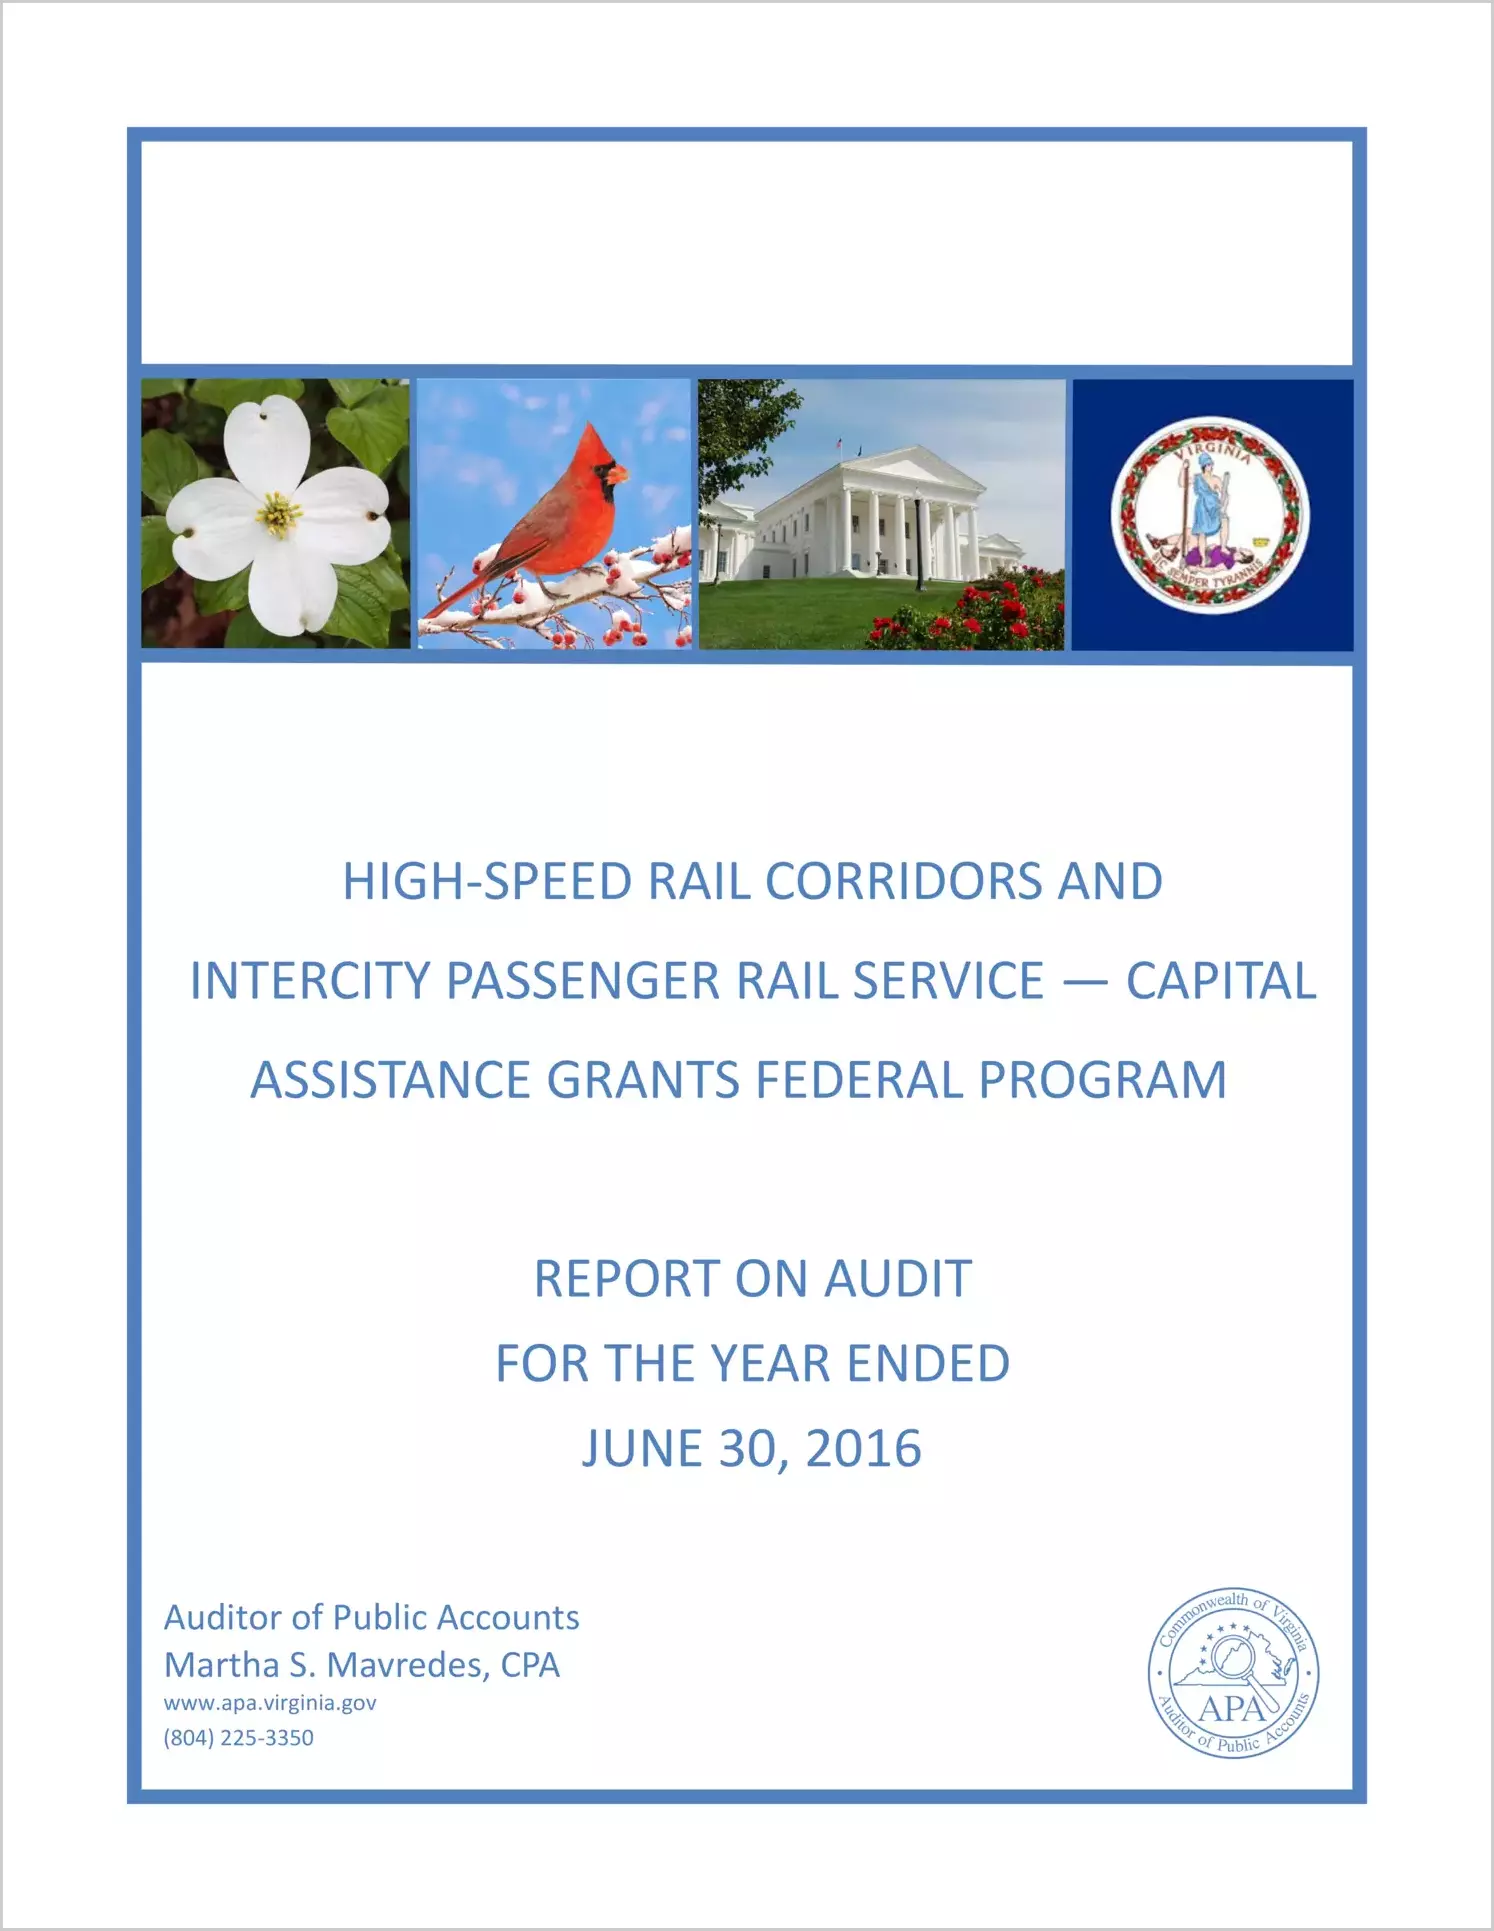 High-Speed Rail Corridors and Intercity Passenger Rail Services - Capital Assistance Grants Federal Program for the year ended June 30, 2016